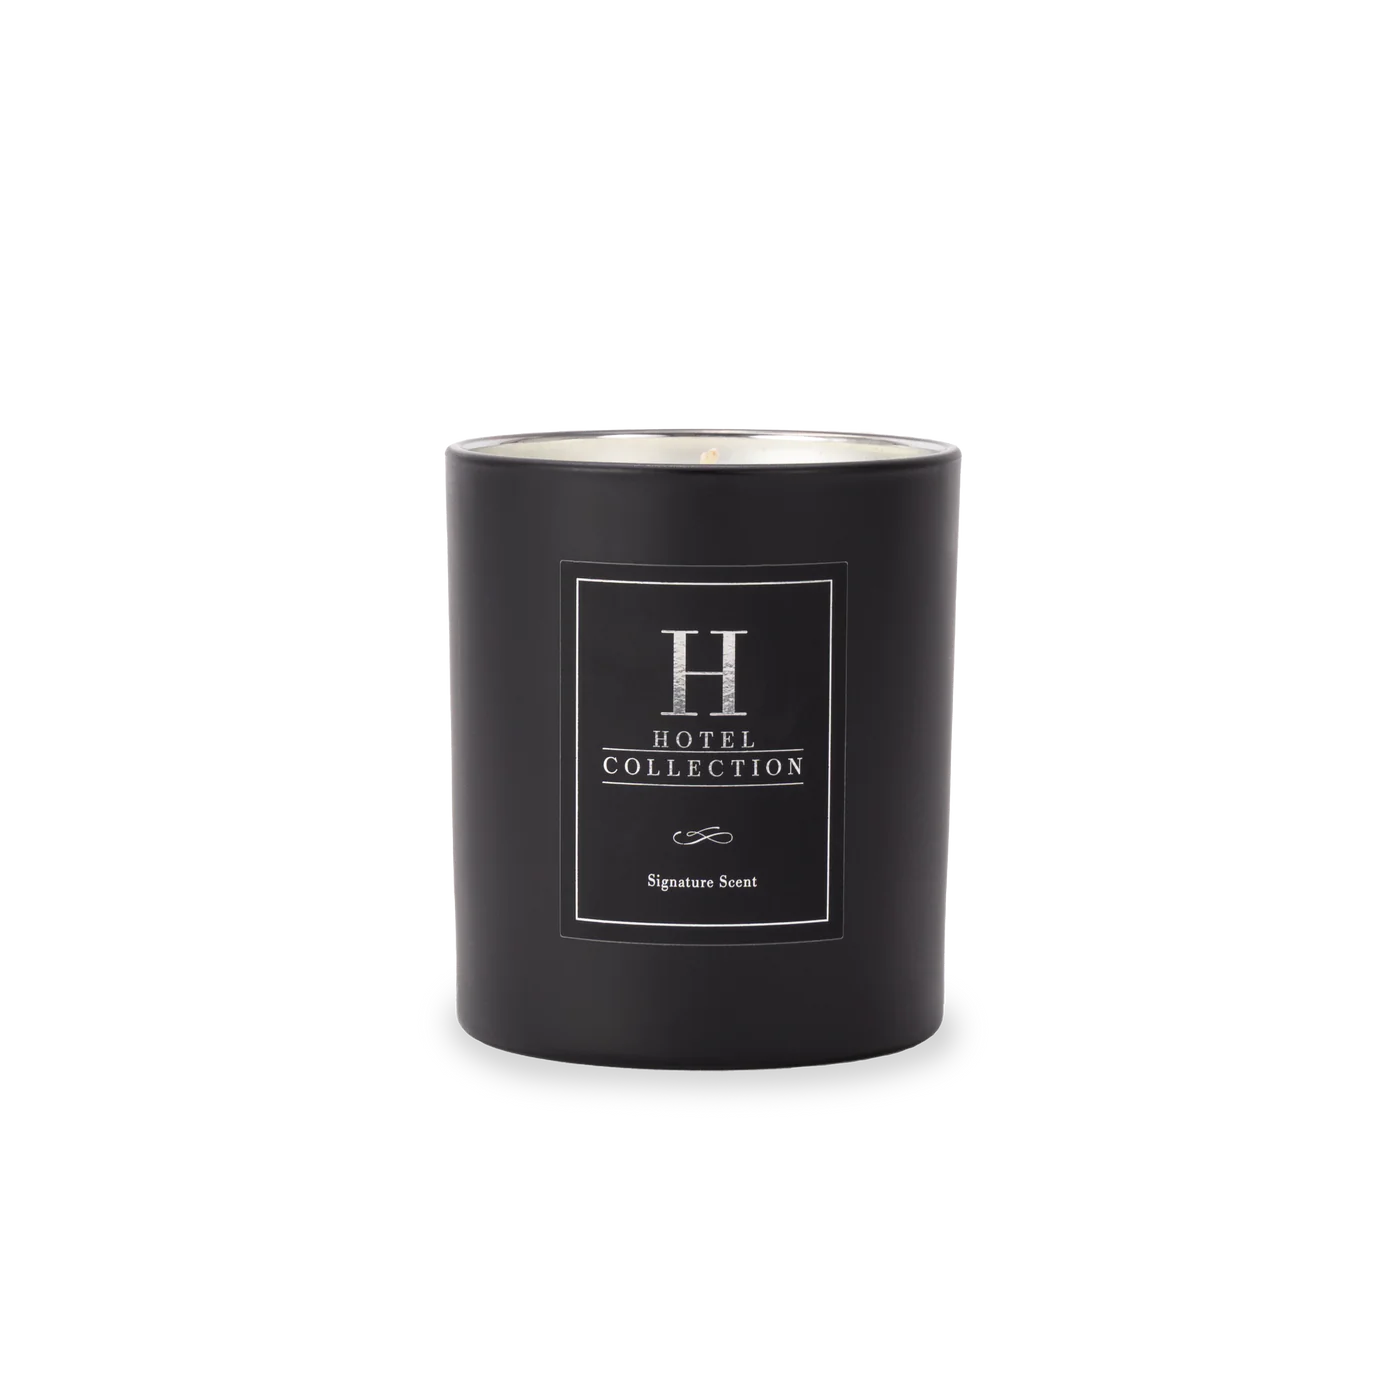 Hotel Collection "My Way" Candle (Inspired by 1 Hotel, Miami)